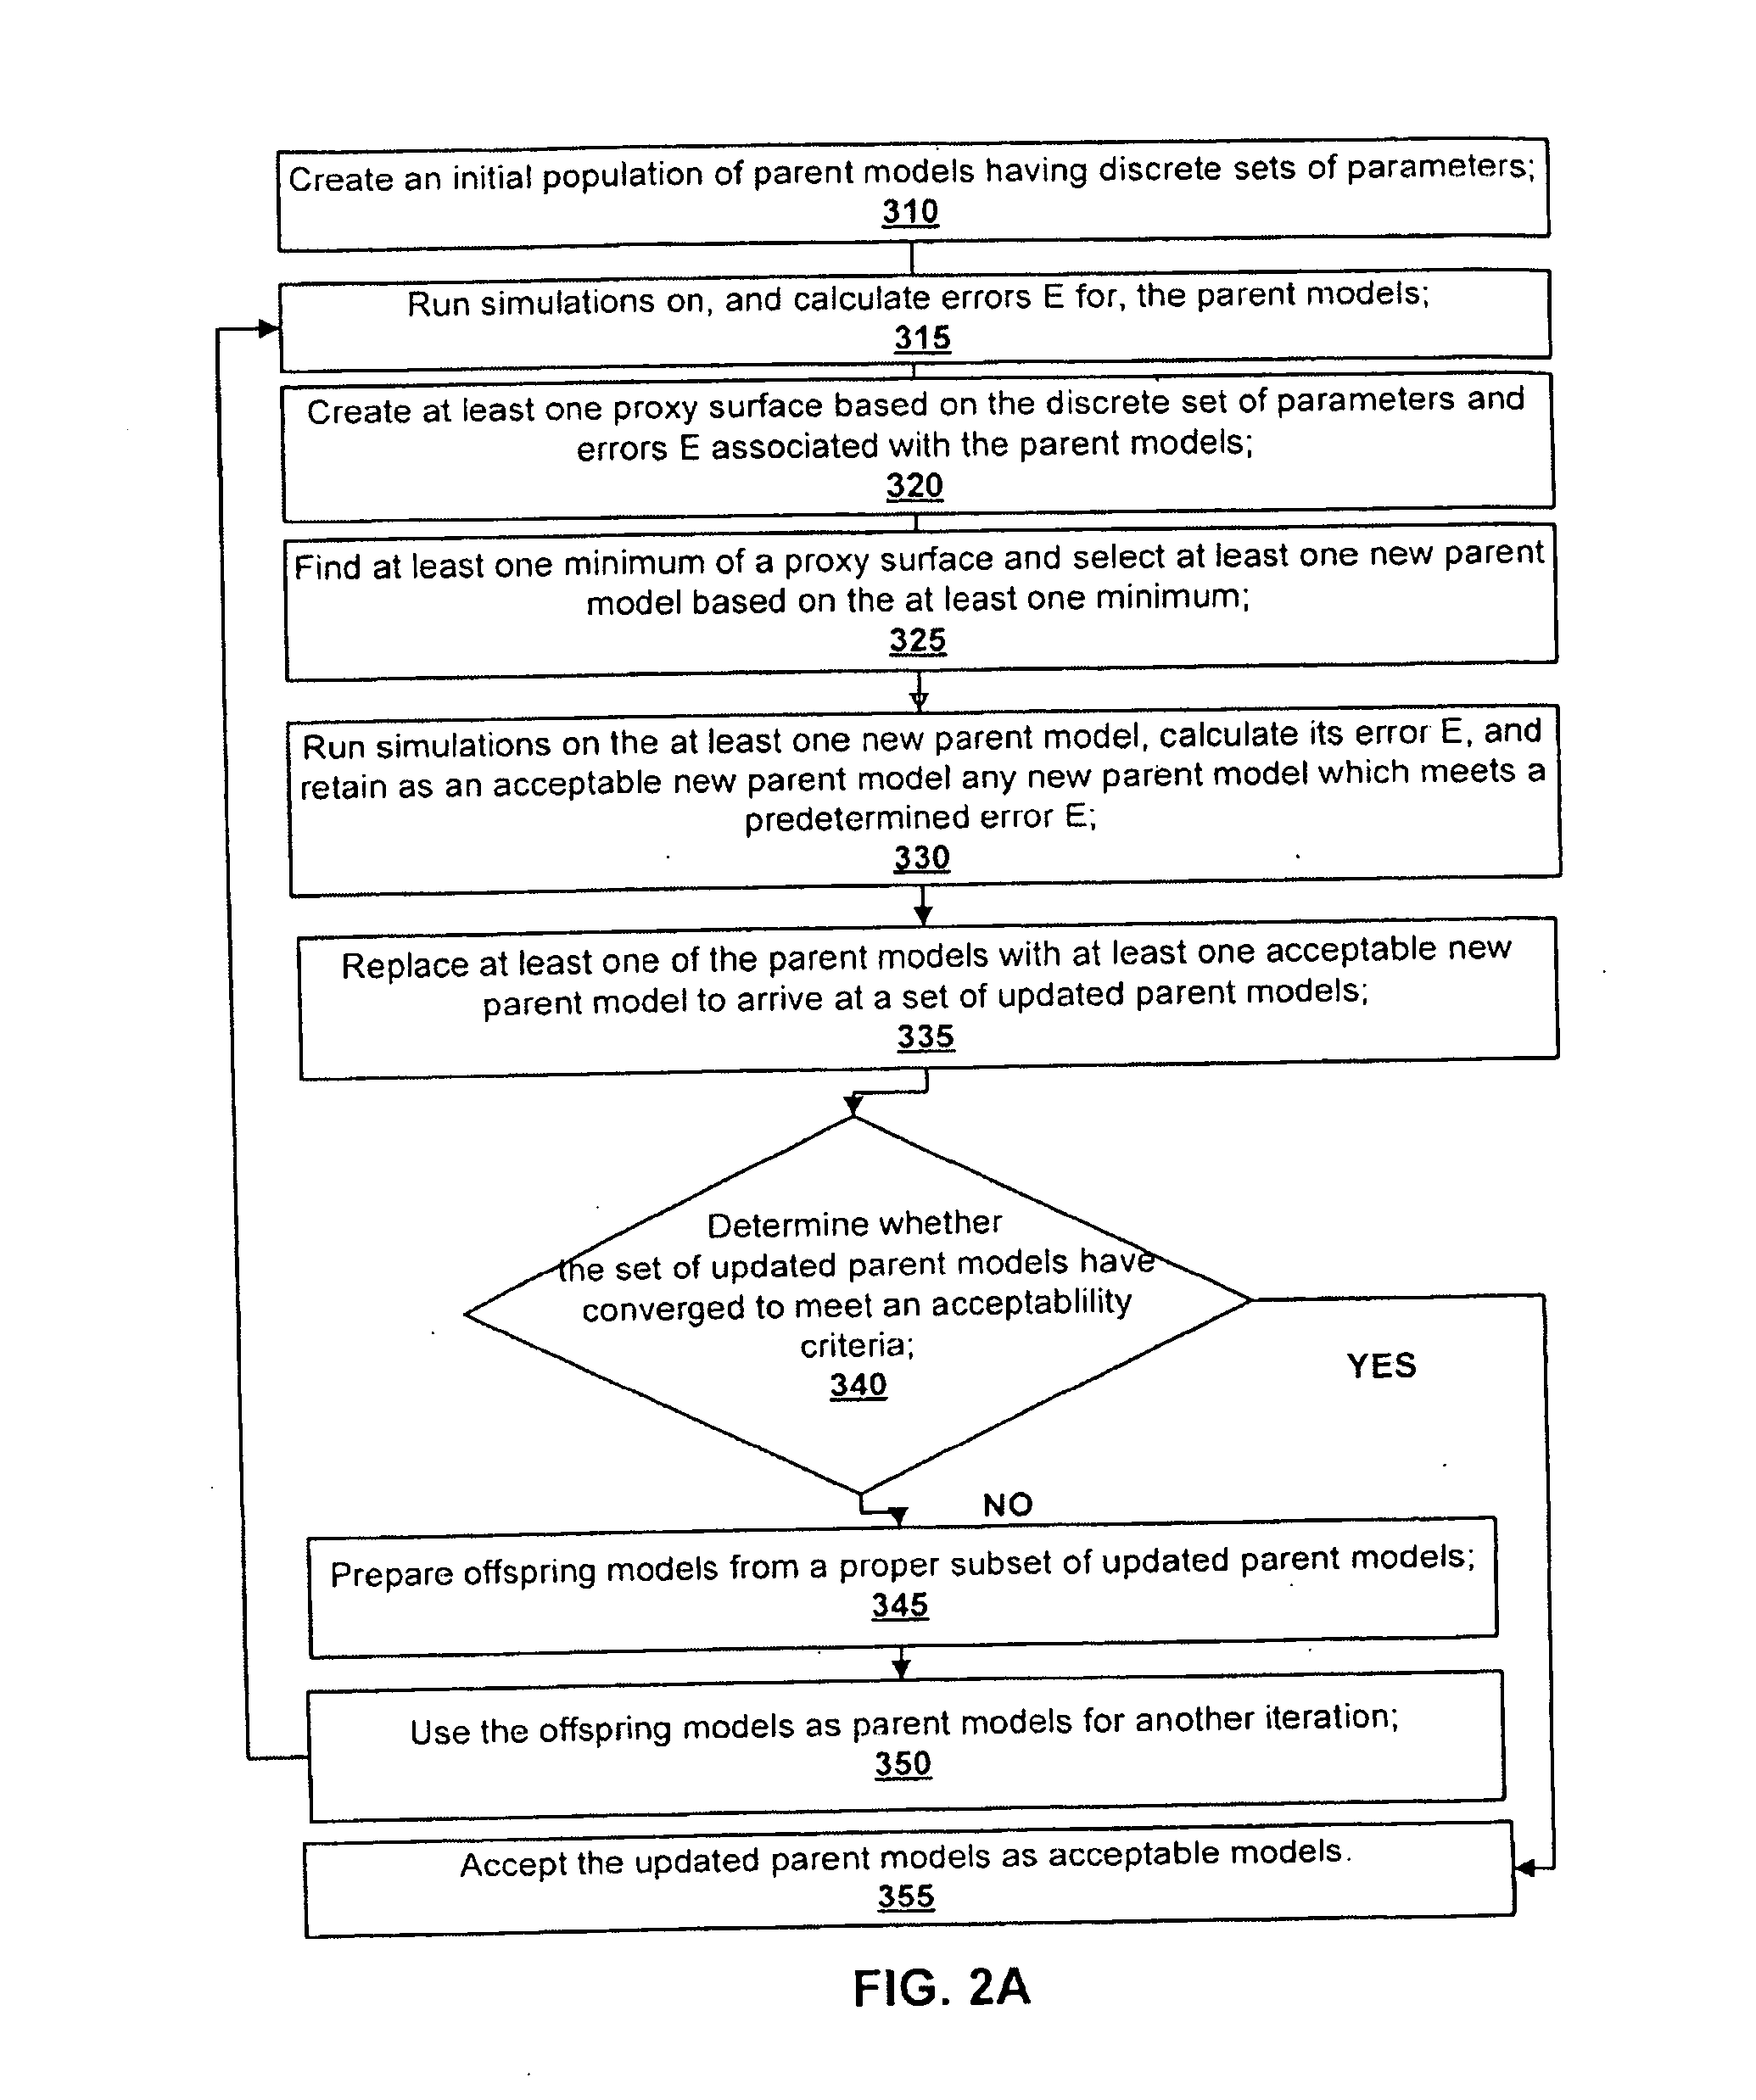 Method for history matching and uncertainty quantification assisted by global optimization techniques utilizing proxies